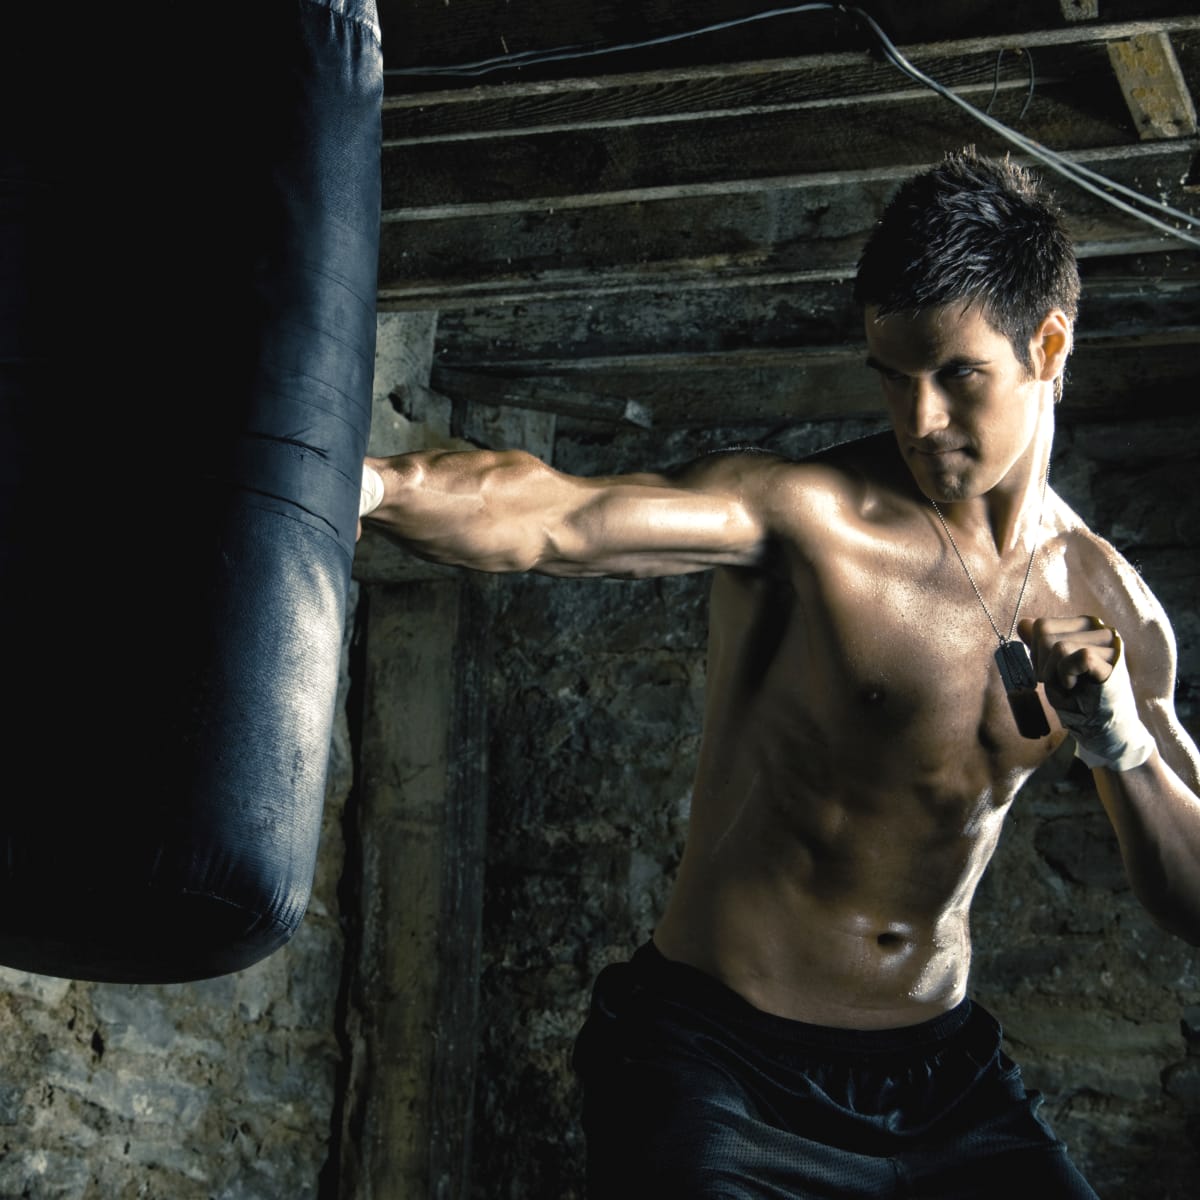 This Boxing Workout Will Get You in the Best Shape of Your Life